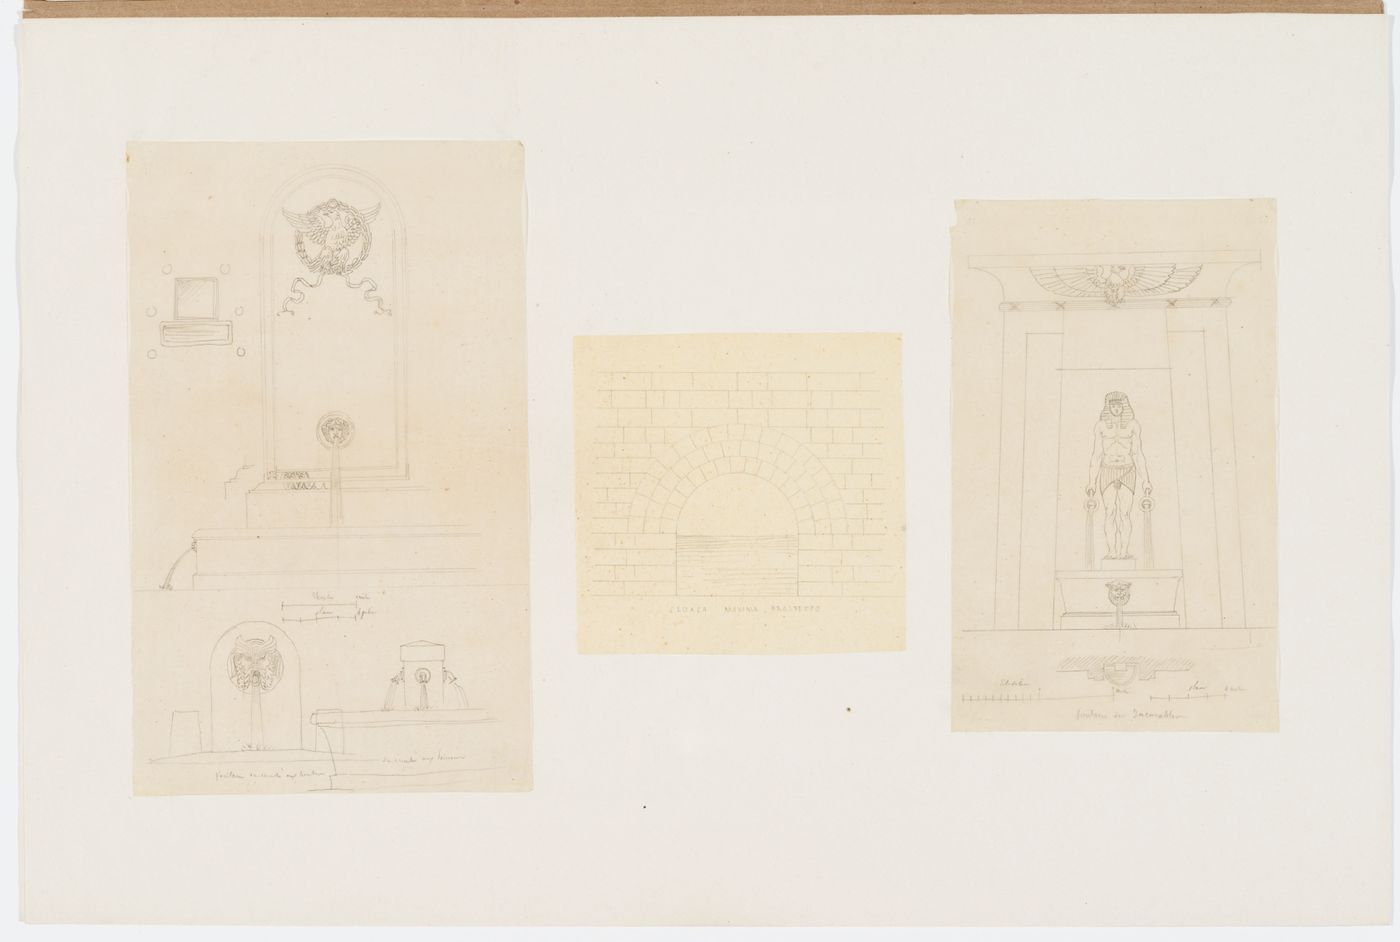 Three elevations of Parisian fountains; Elevation of the Cloaca Maxima, Rome; Front elevation and partial plan of the Fontaine de l'Incurable, also known as the Fontaine du Fellah, Paris